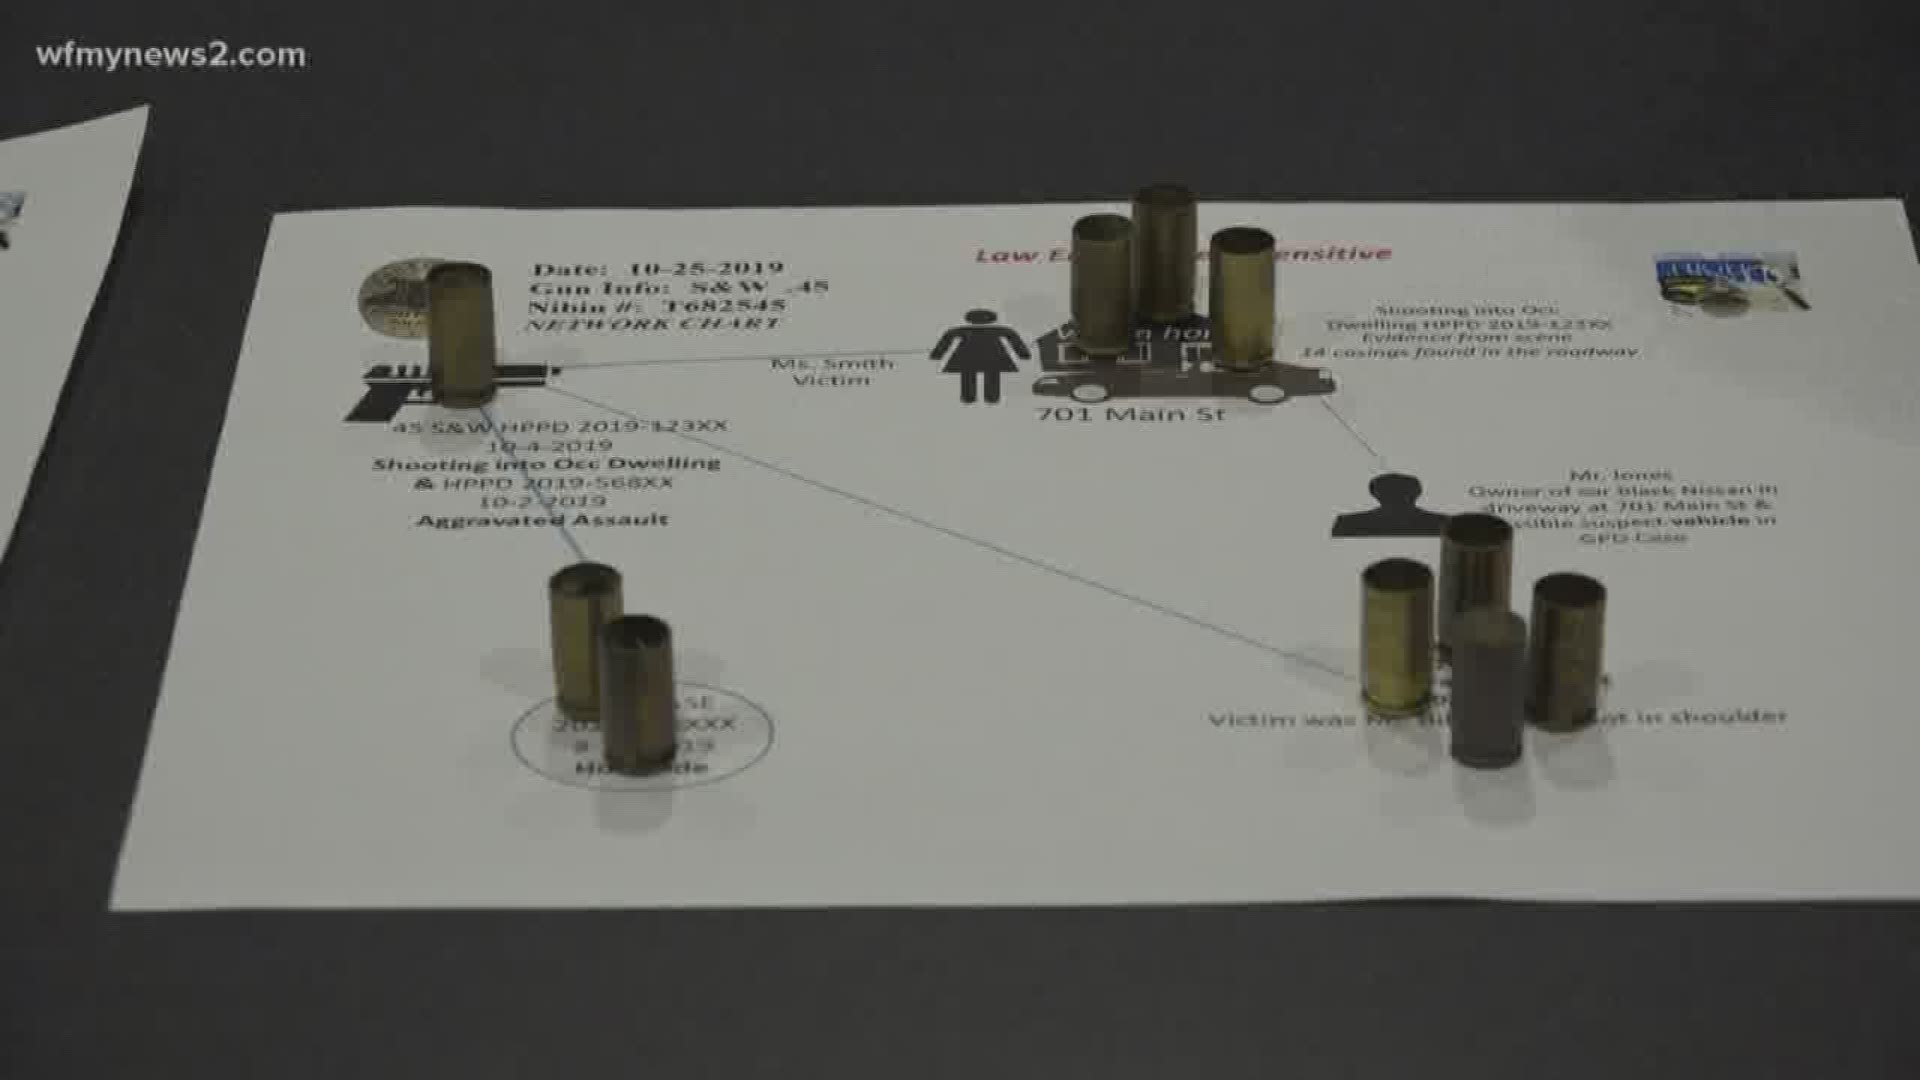 The shell casings combined with ballistics technology, could make a break in the case. It's something High Point police wants as a crime-solving tool.